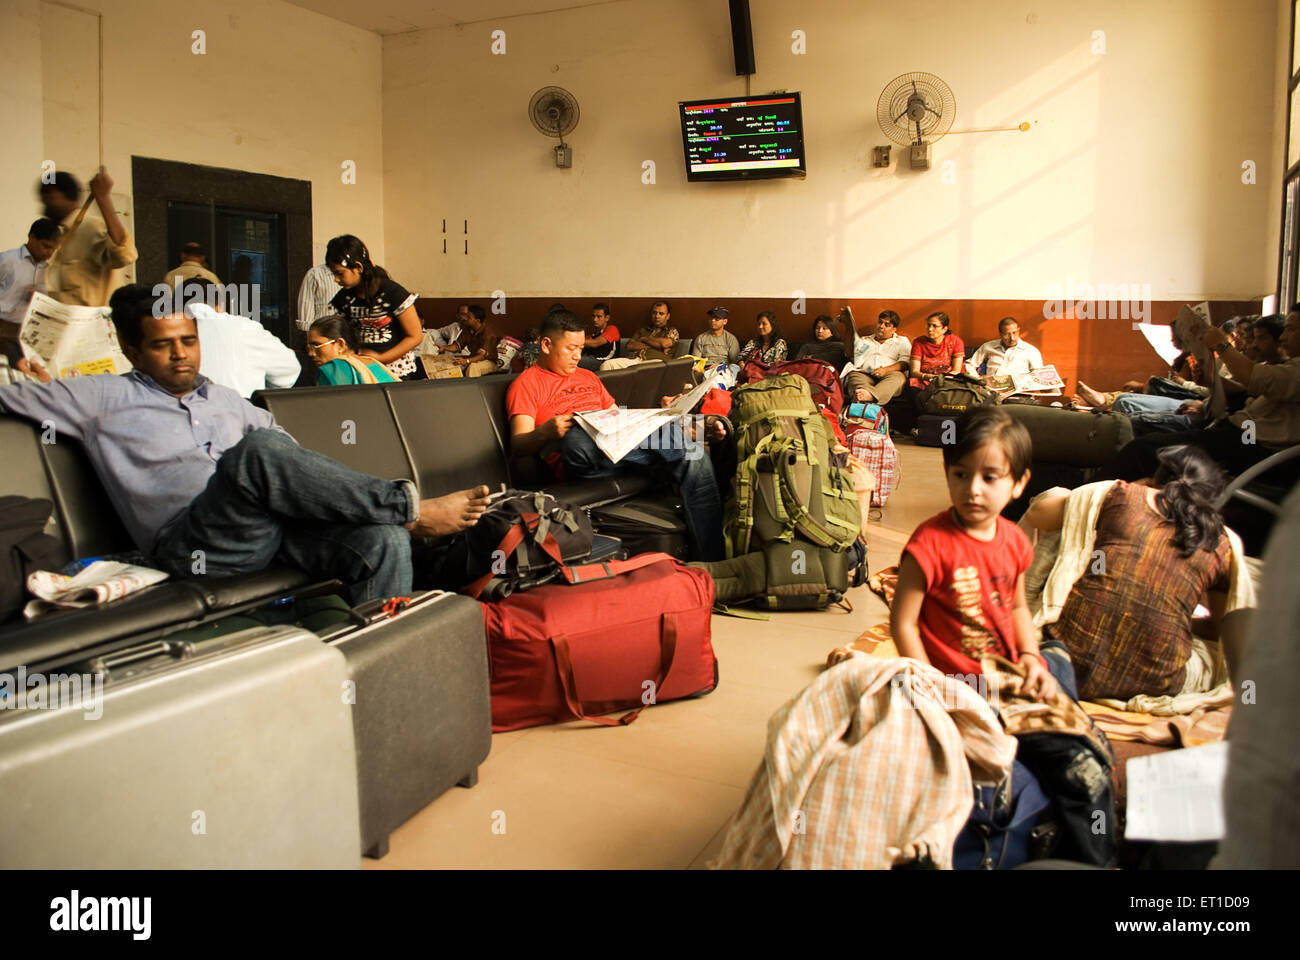 People sitting in waiting room, Railway Station, New Delhi, India, Asia Stock Photo